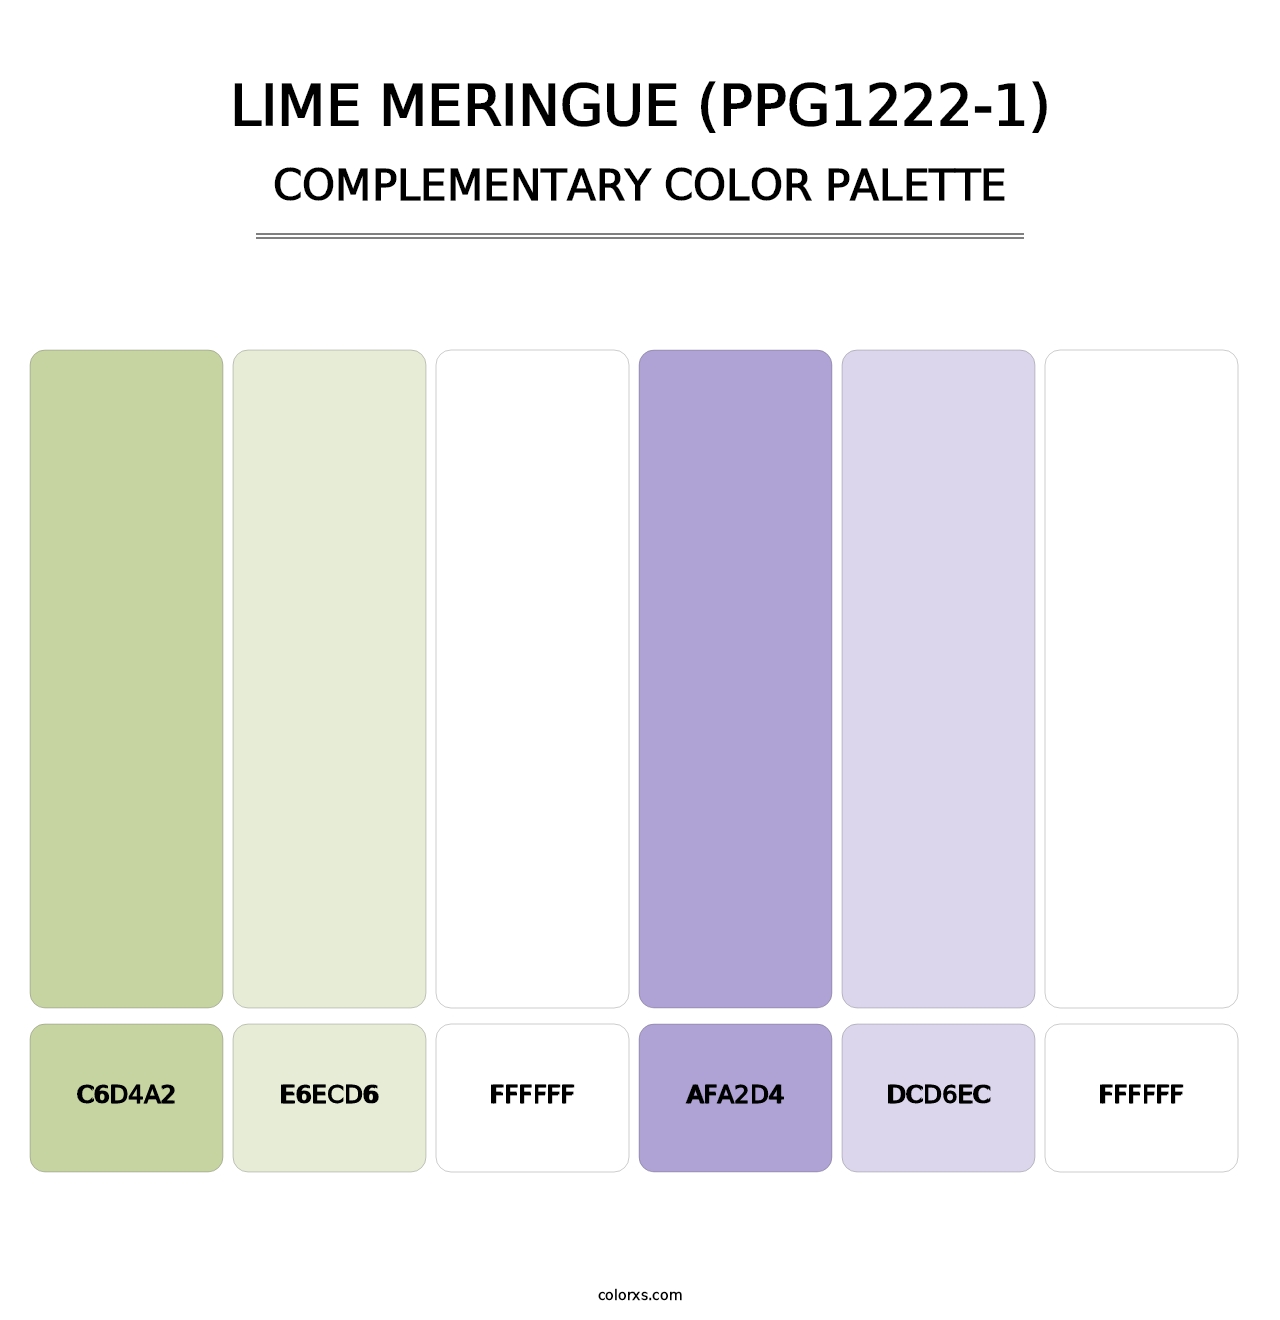 Lime Meringue (PPG1222-1) - Complementary Color Palette